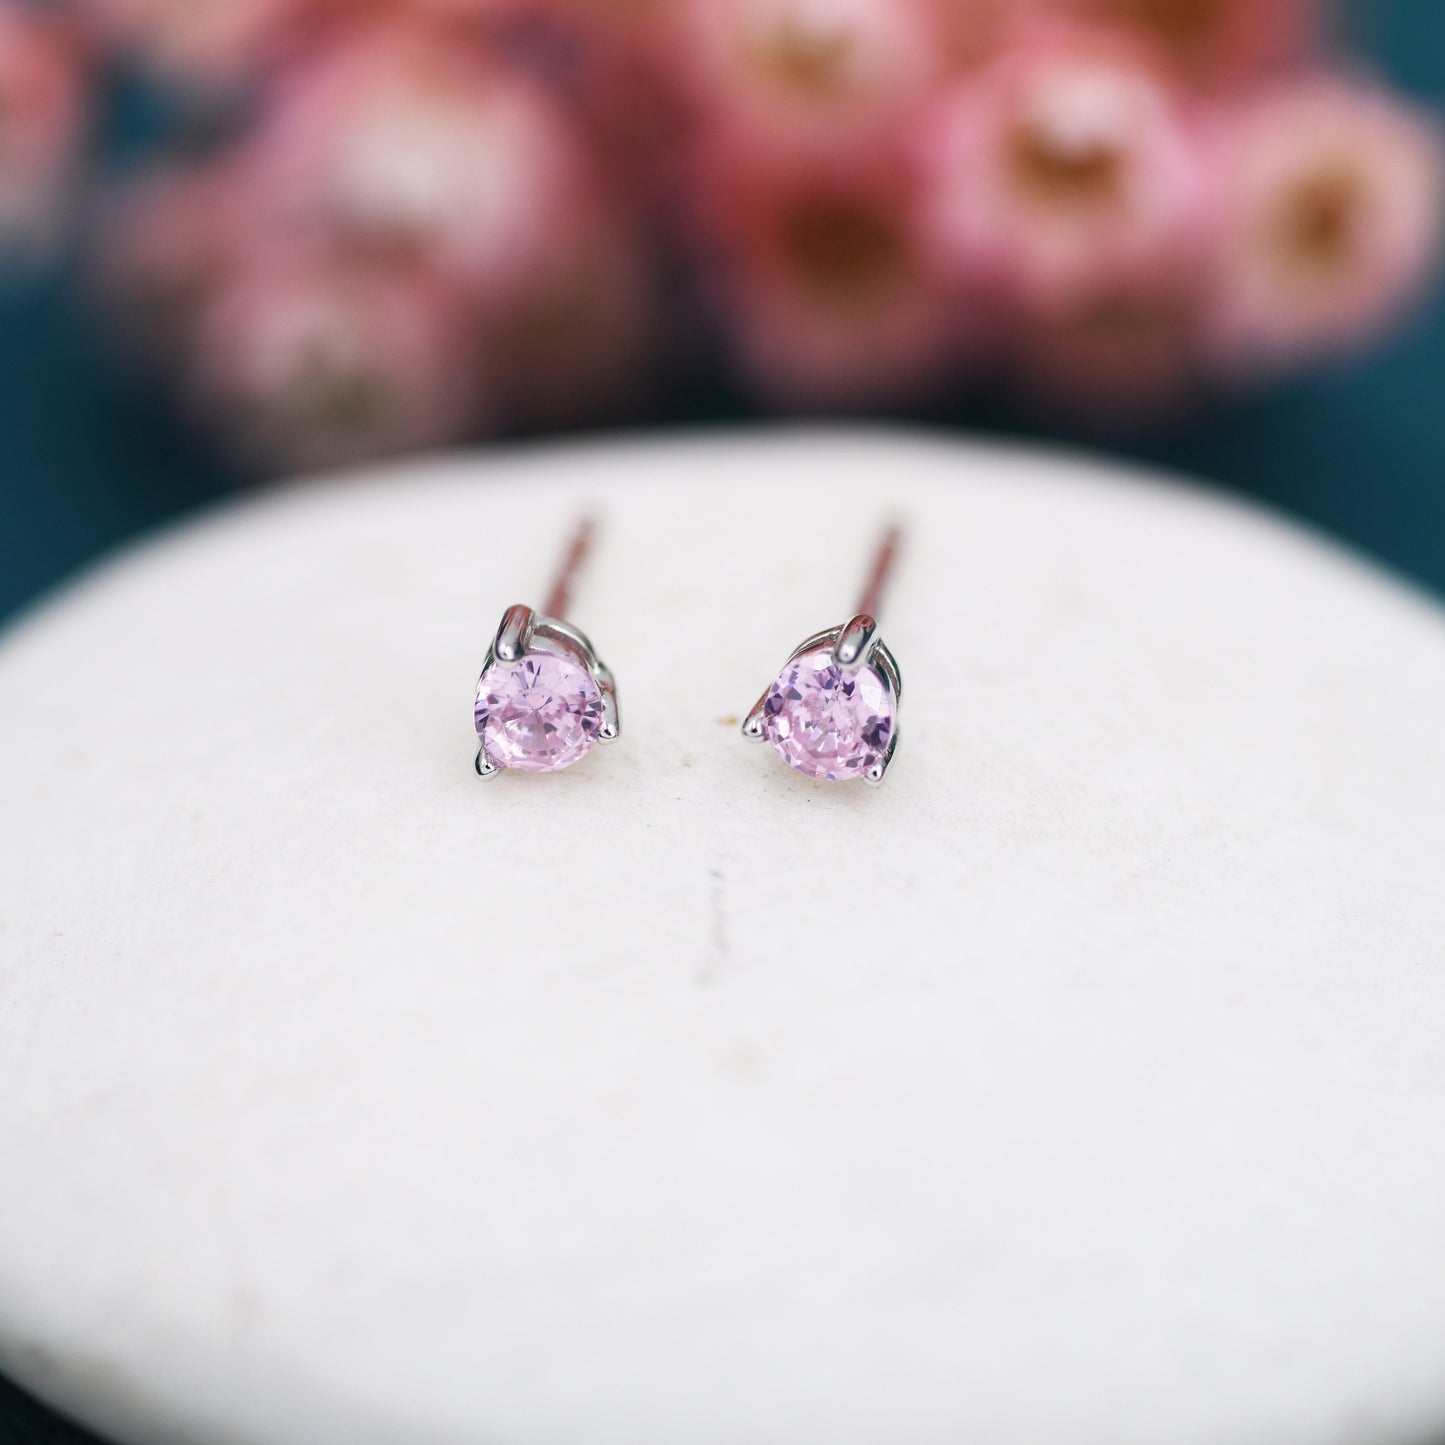 Pink CZ Stud Earrings in Sterling Silver, Silver or Gold, 3mm, Three Prong, Pink Stacking Earrings, October Birthstone